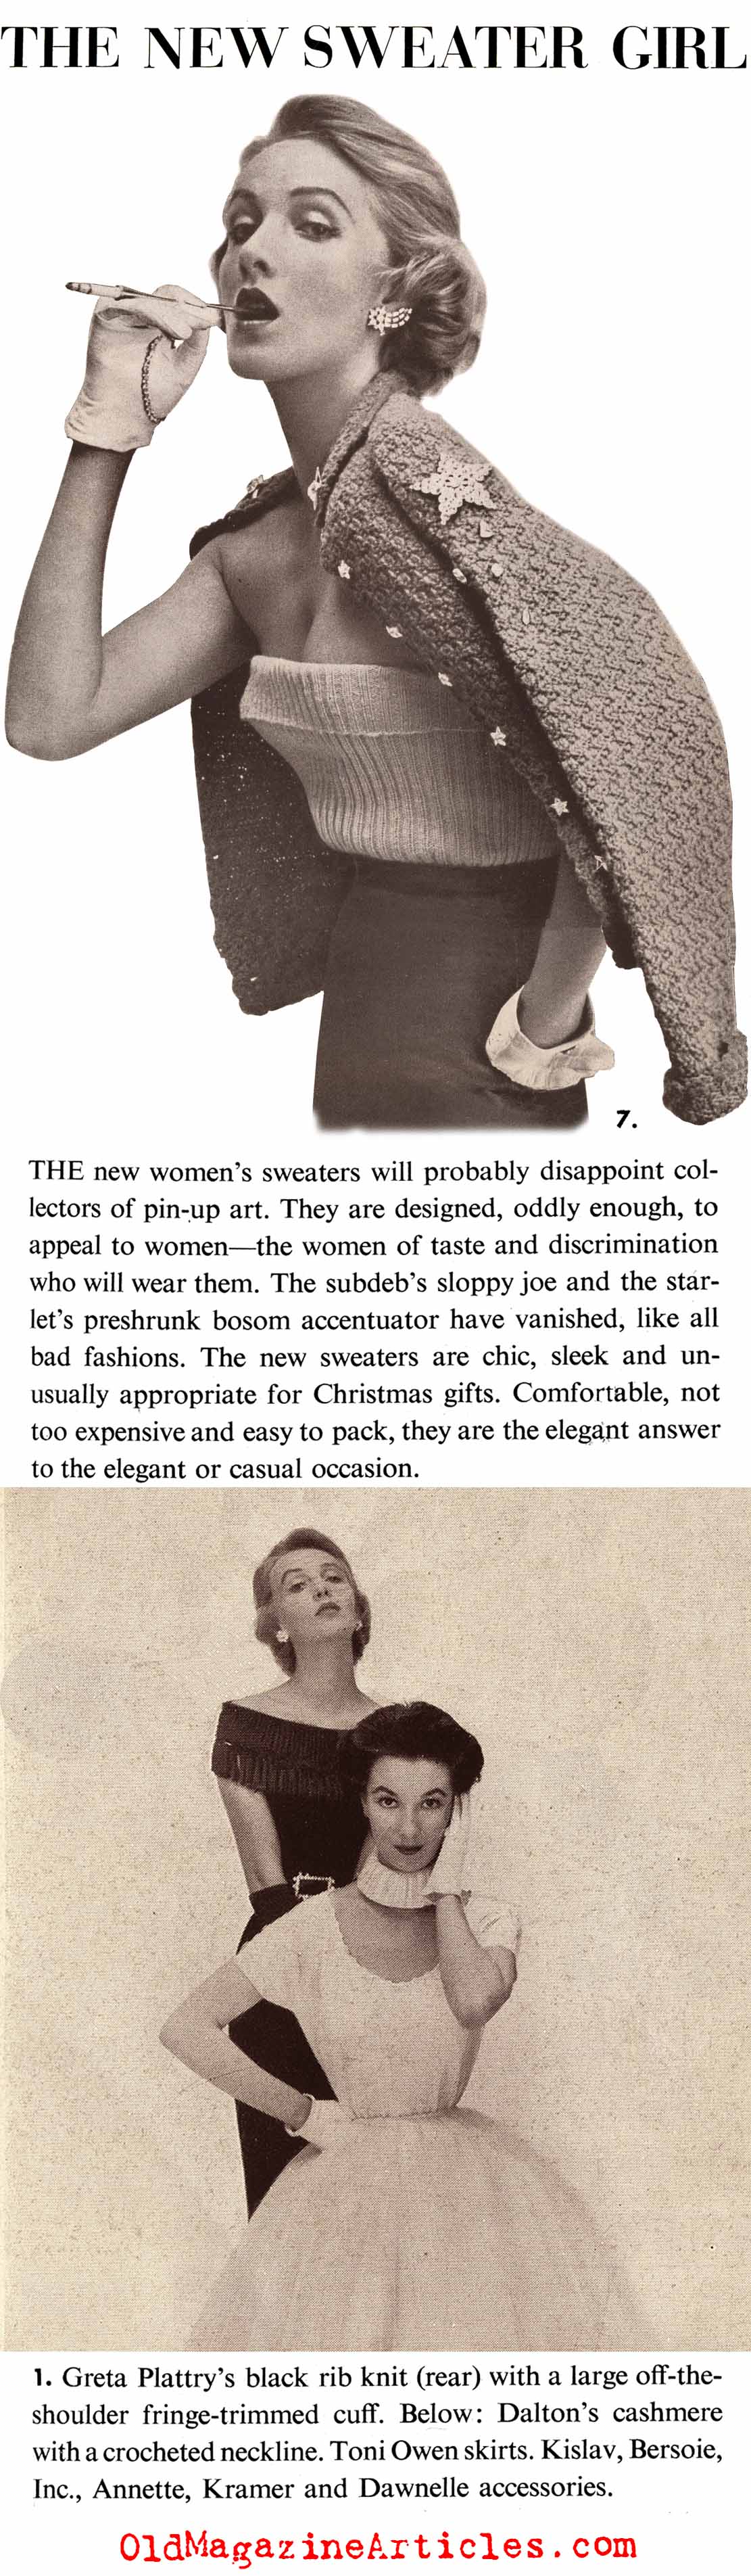 Sweaters and Knits Elevated (Holiday, 1952)